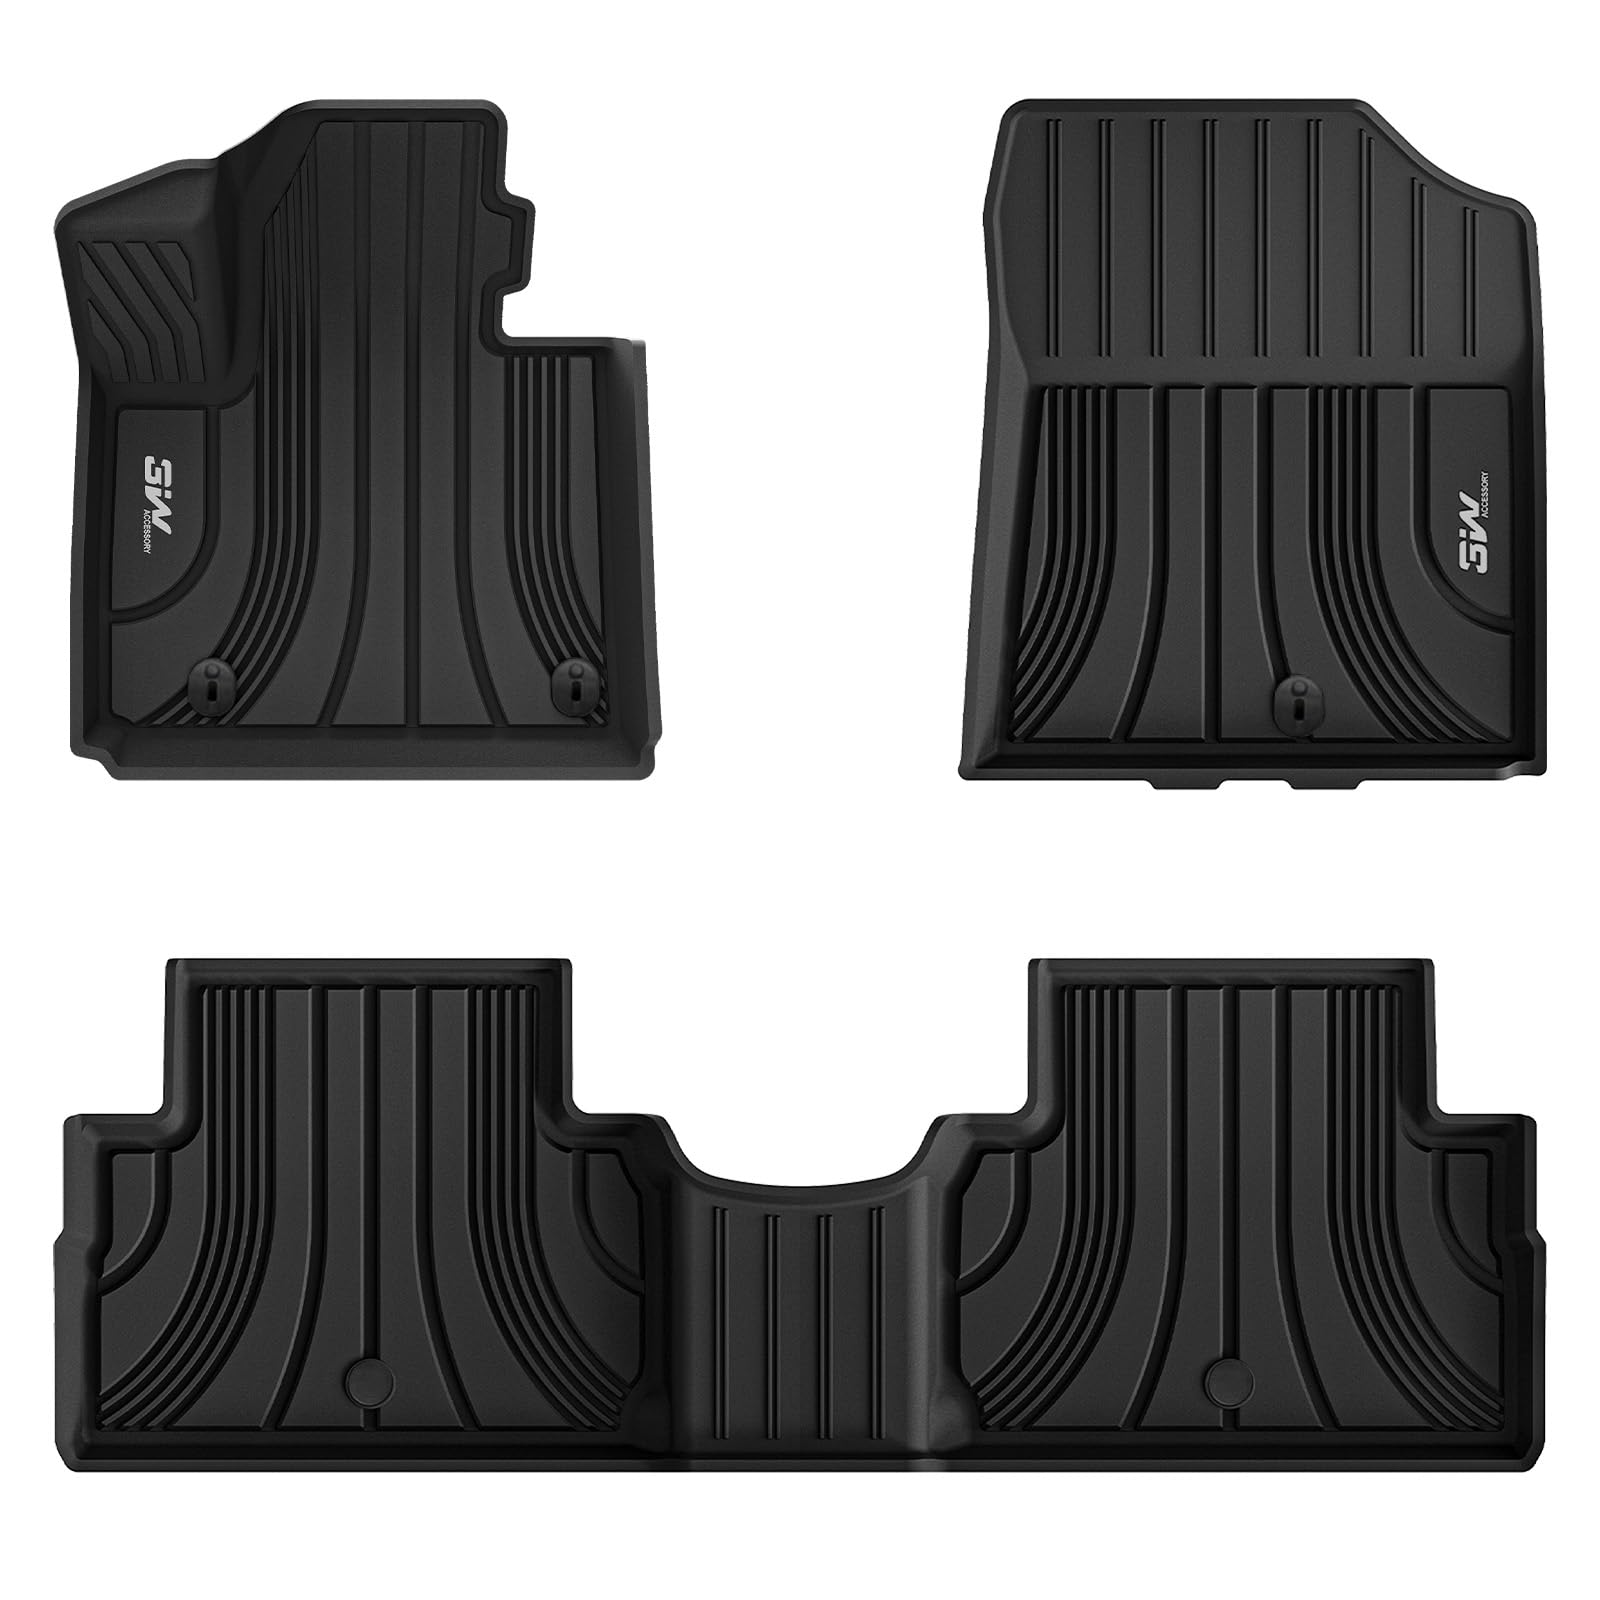 3W Hyundai Santa Fe 2021-2023 (Only for Hybrid) Custom Floor Mats TPE Material & All-Weather Protection Vehicles & Parts 3Wliners 2021-2023 Santa Fe Hybrid 1st&2nd Row Mats